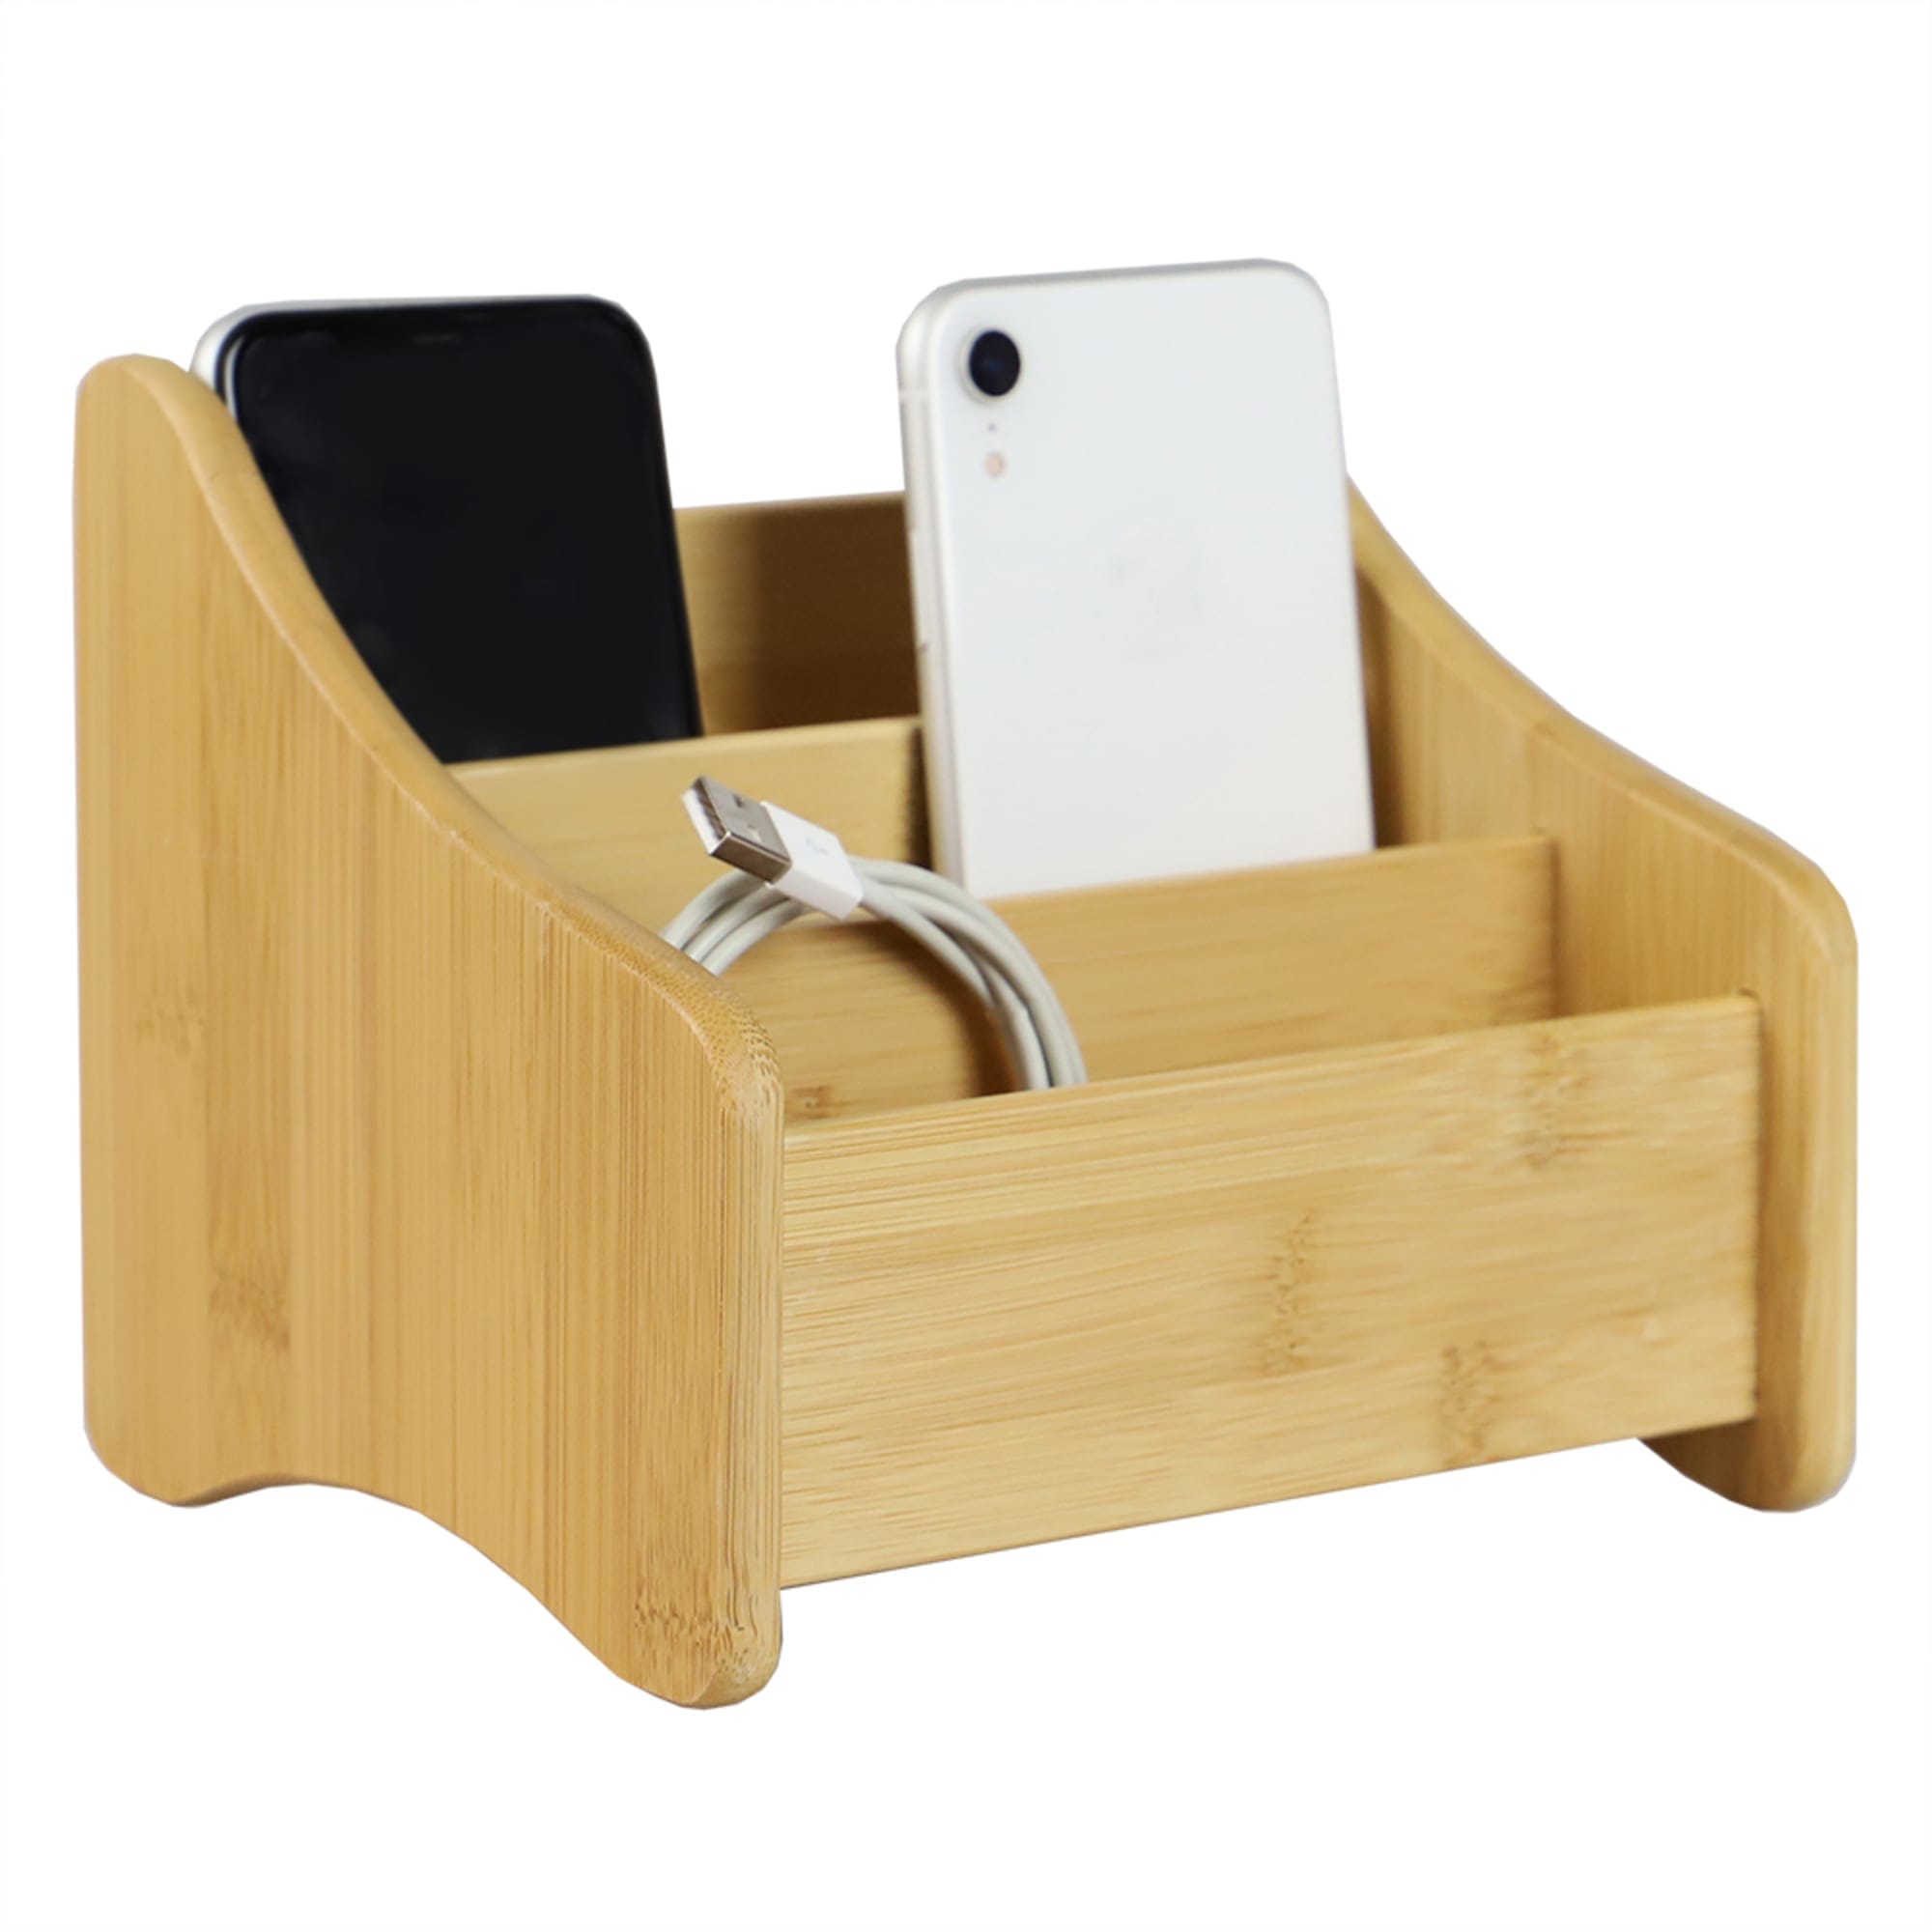 Home Basics Large Bamboo Charging Station, Natural $10.00 EACH, CASE PACK OF 8